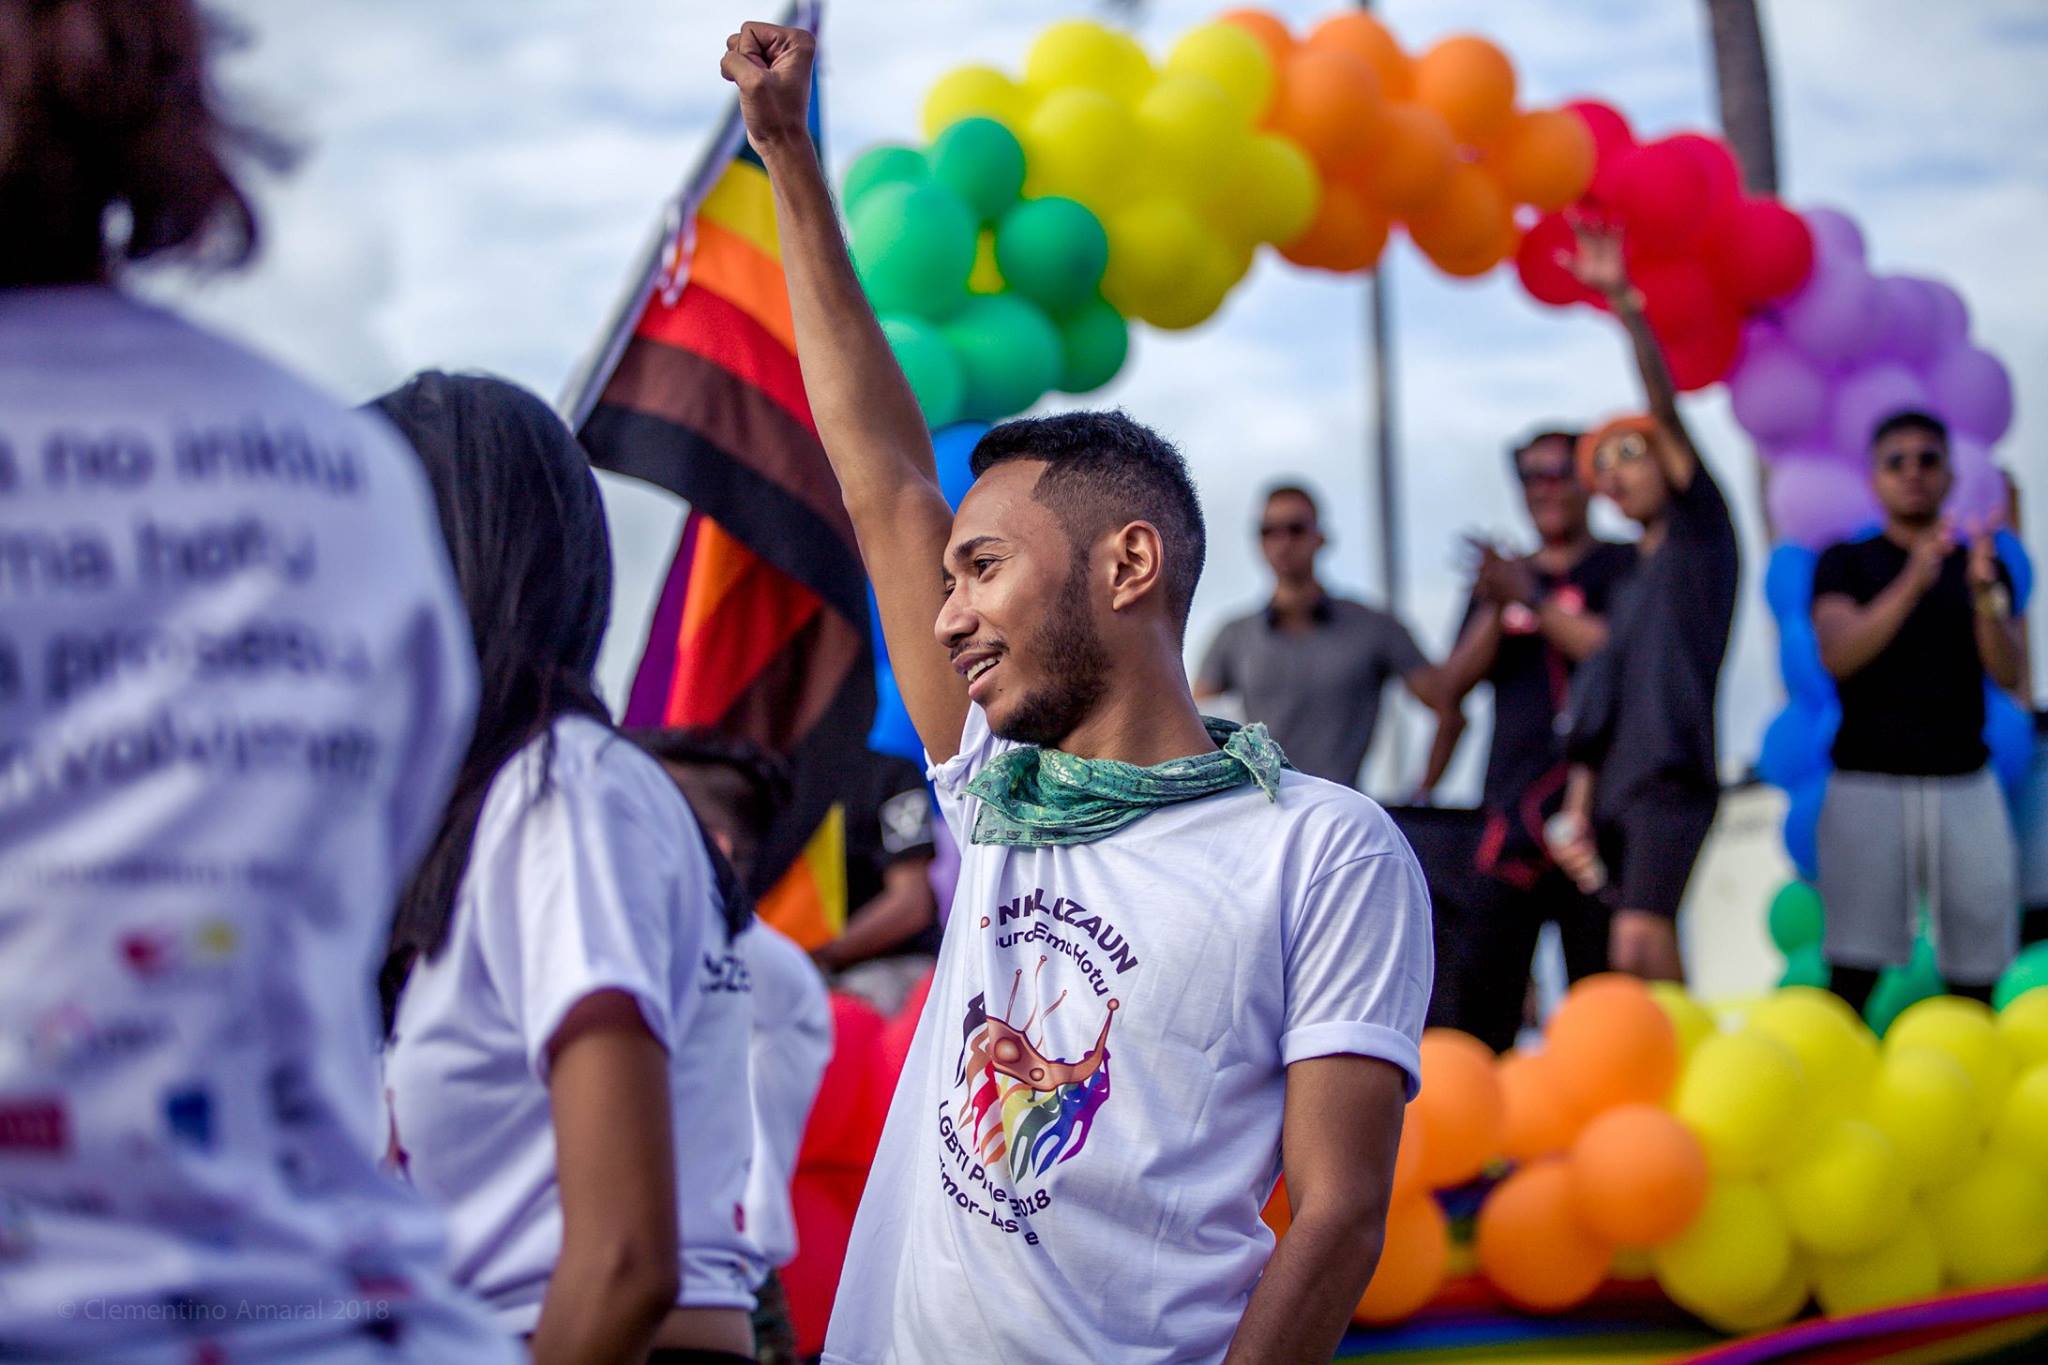 Community members march in Timor-Leste’s 2018 Pride parade. Credit: Clementino Amaral